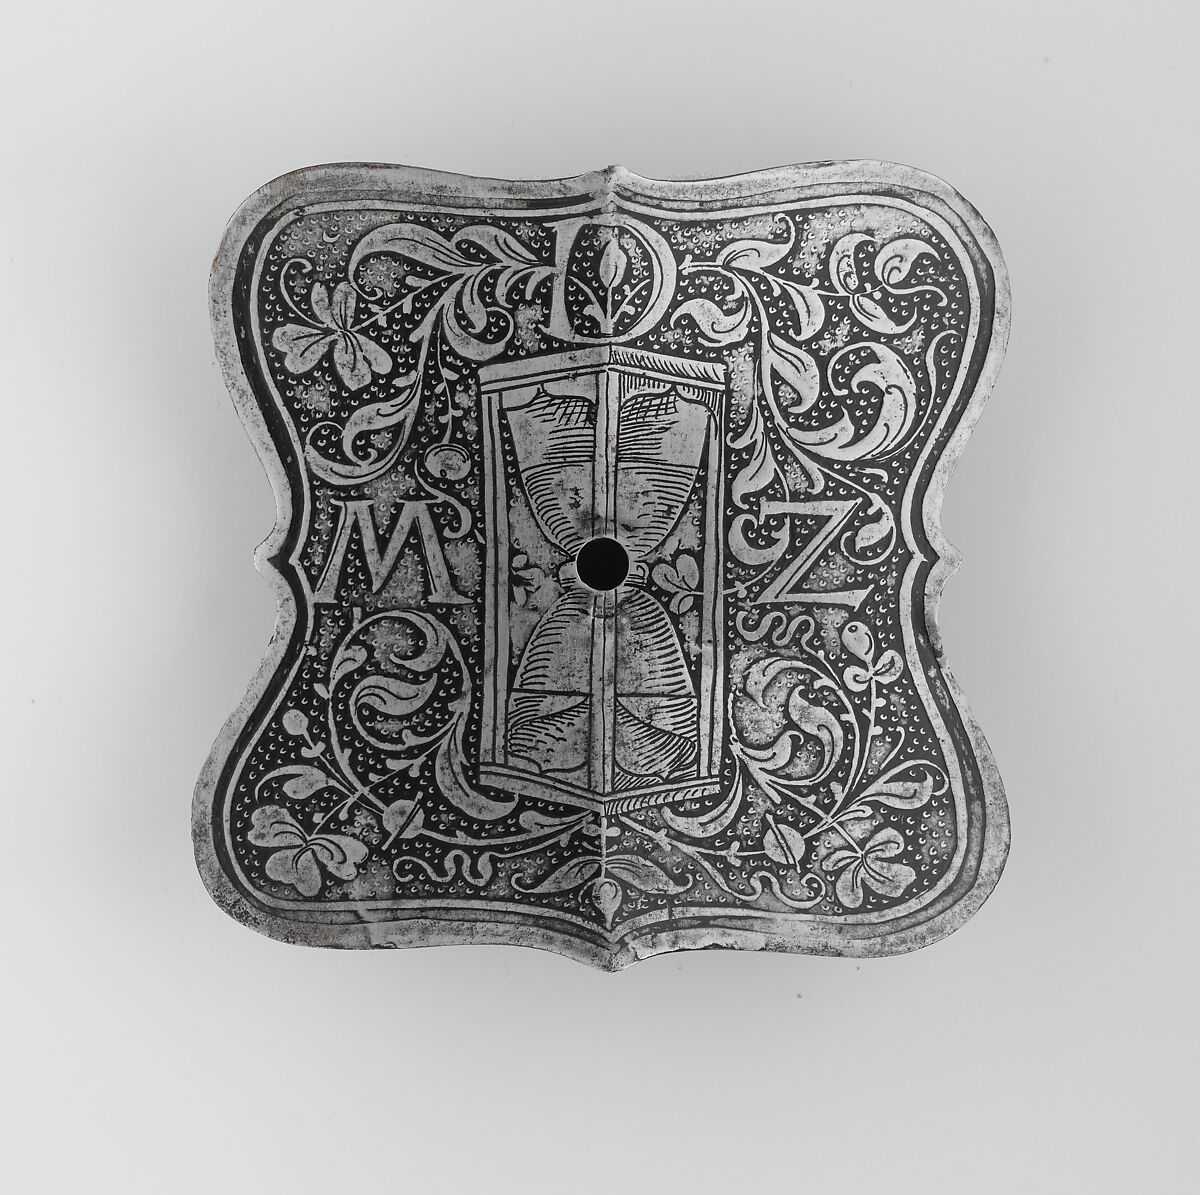 Escutcheon Plate with the Device of Ottheinrich, Count Palatine of the Rhine (1502–1559), Steel, German, Augsburg